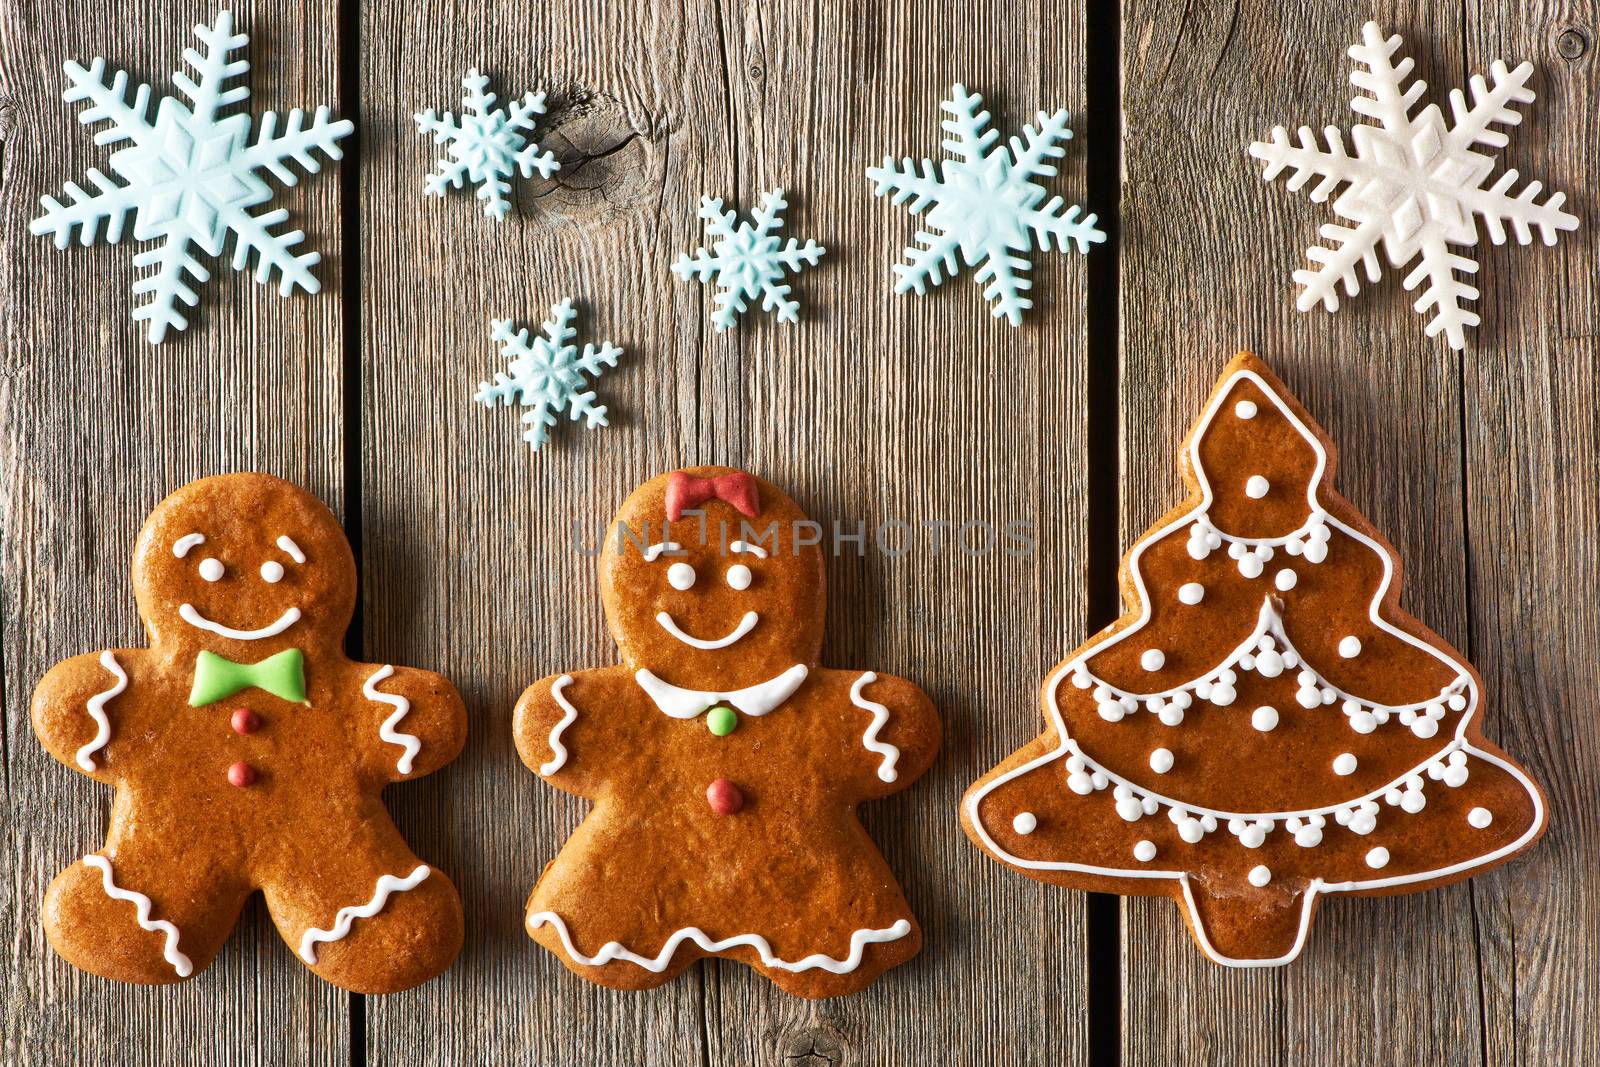 Christmas gingerbread couple and tree cookies by haveseen